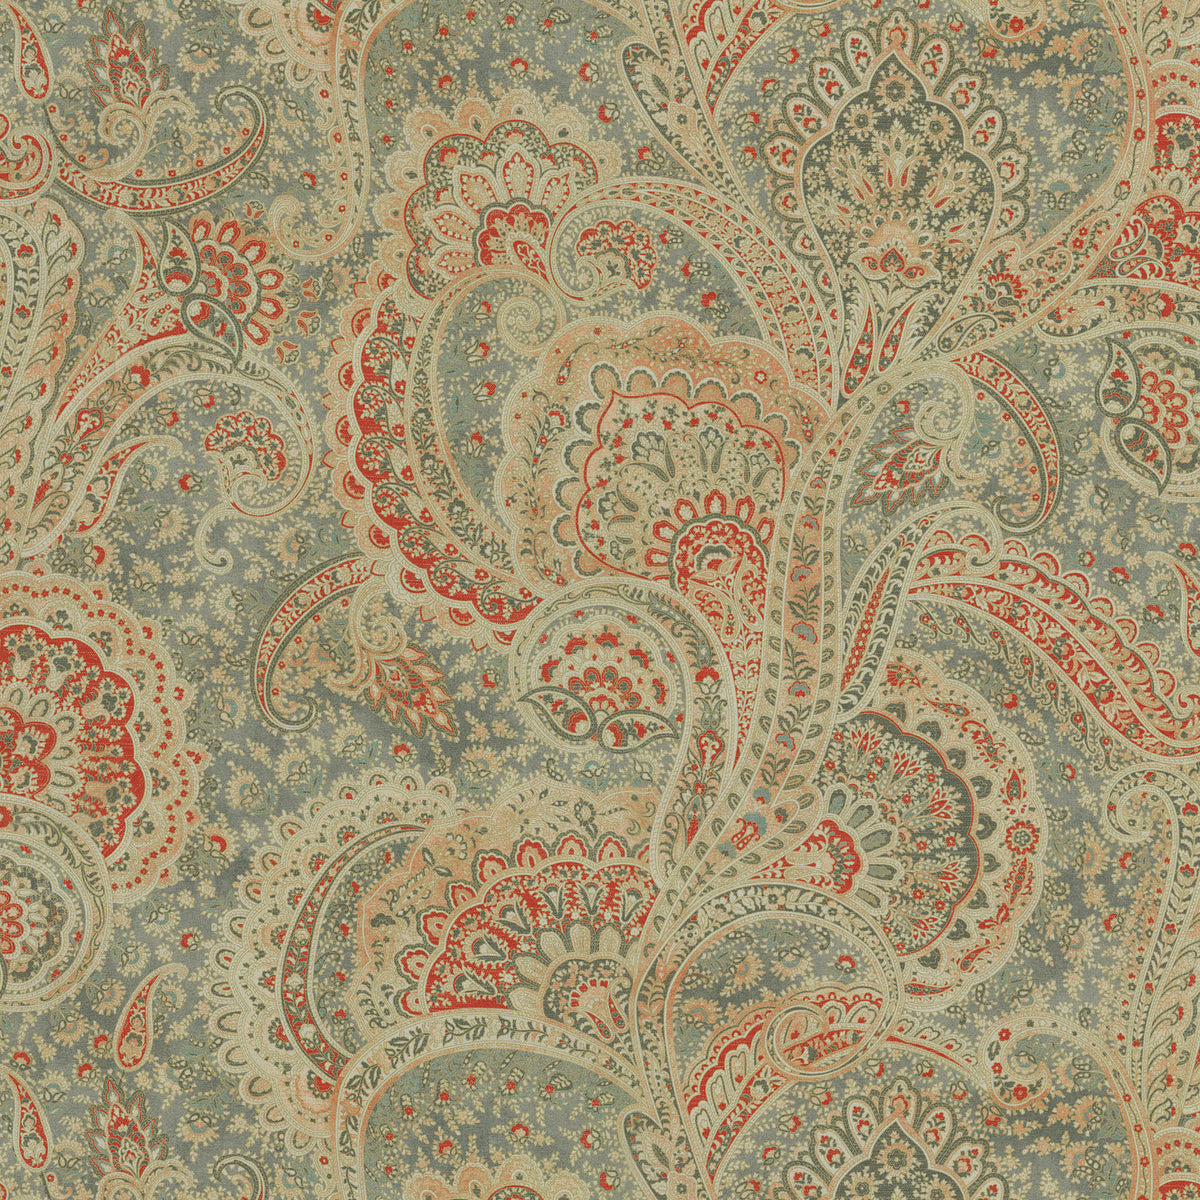 P/K Lifestyles Sultan's Paisley - Ember 409261 Fabric Swatch